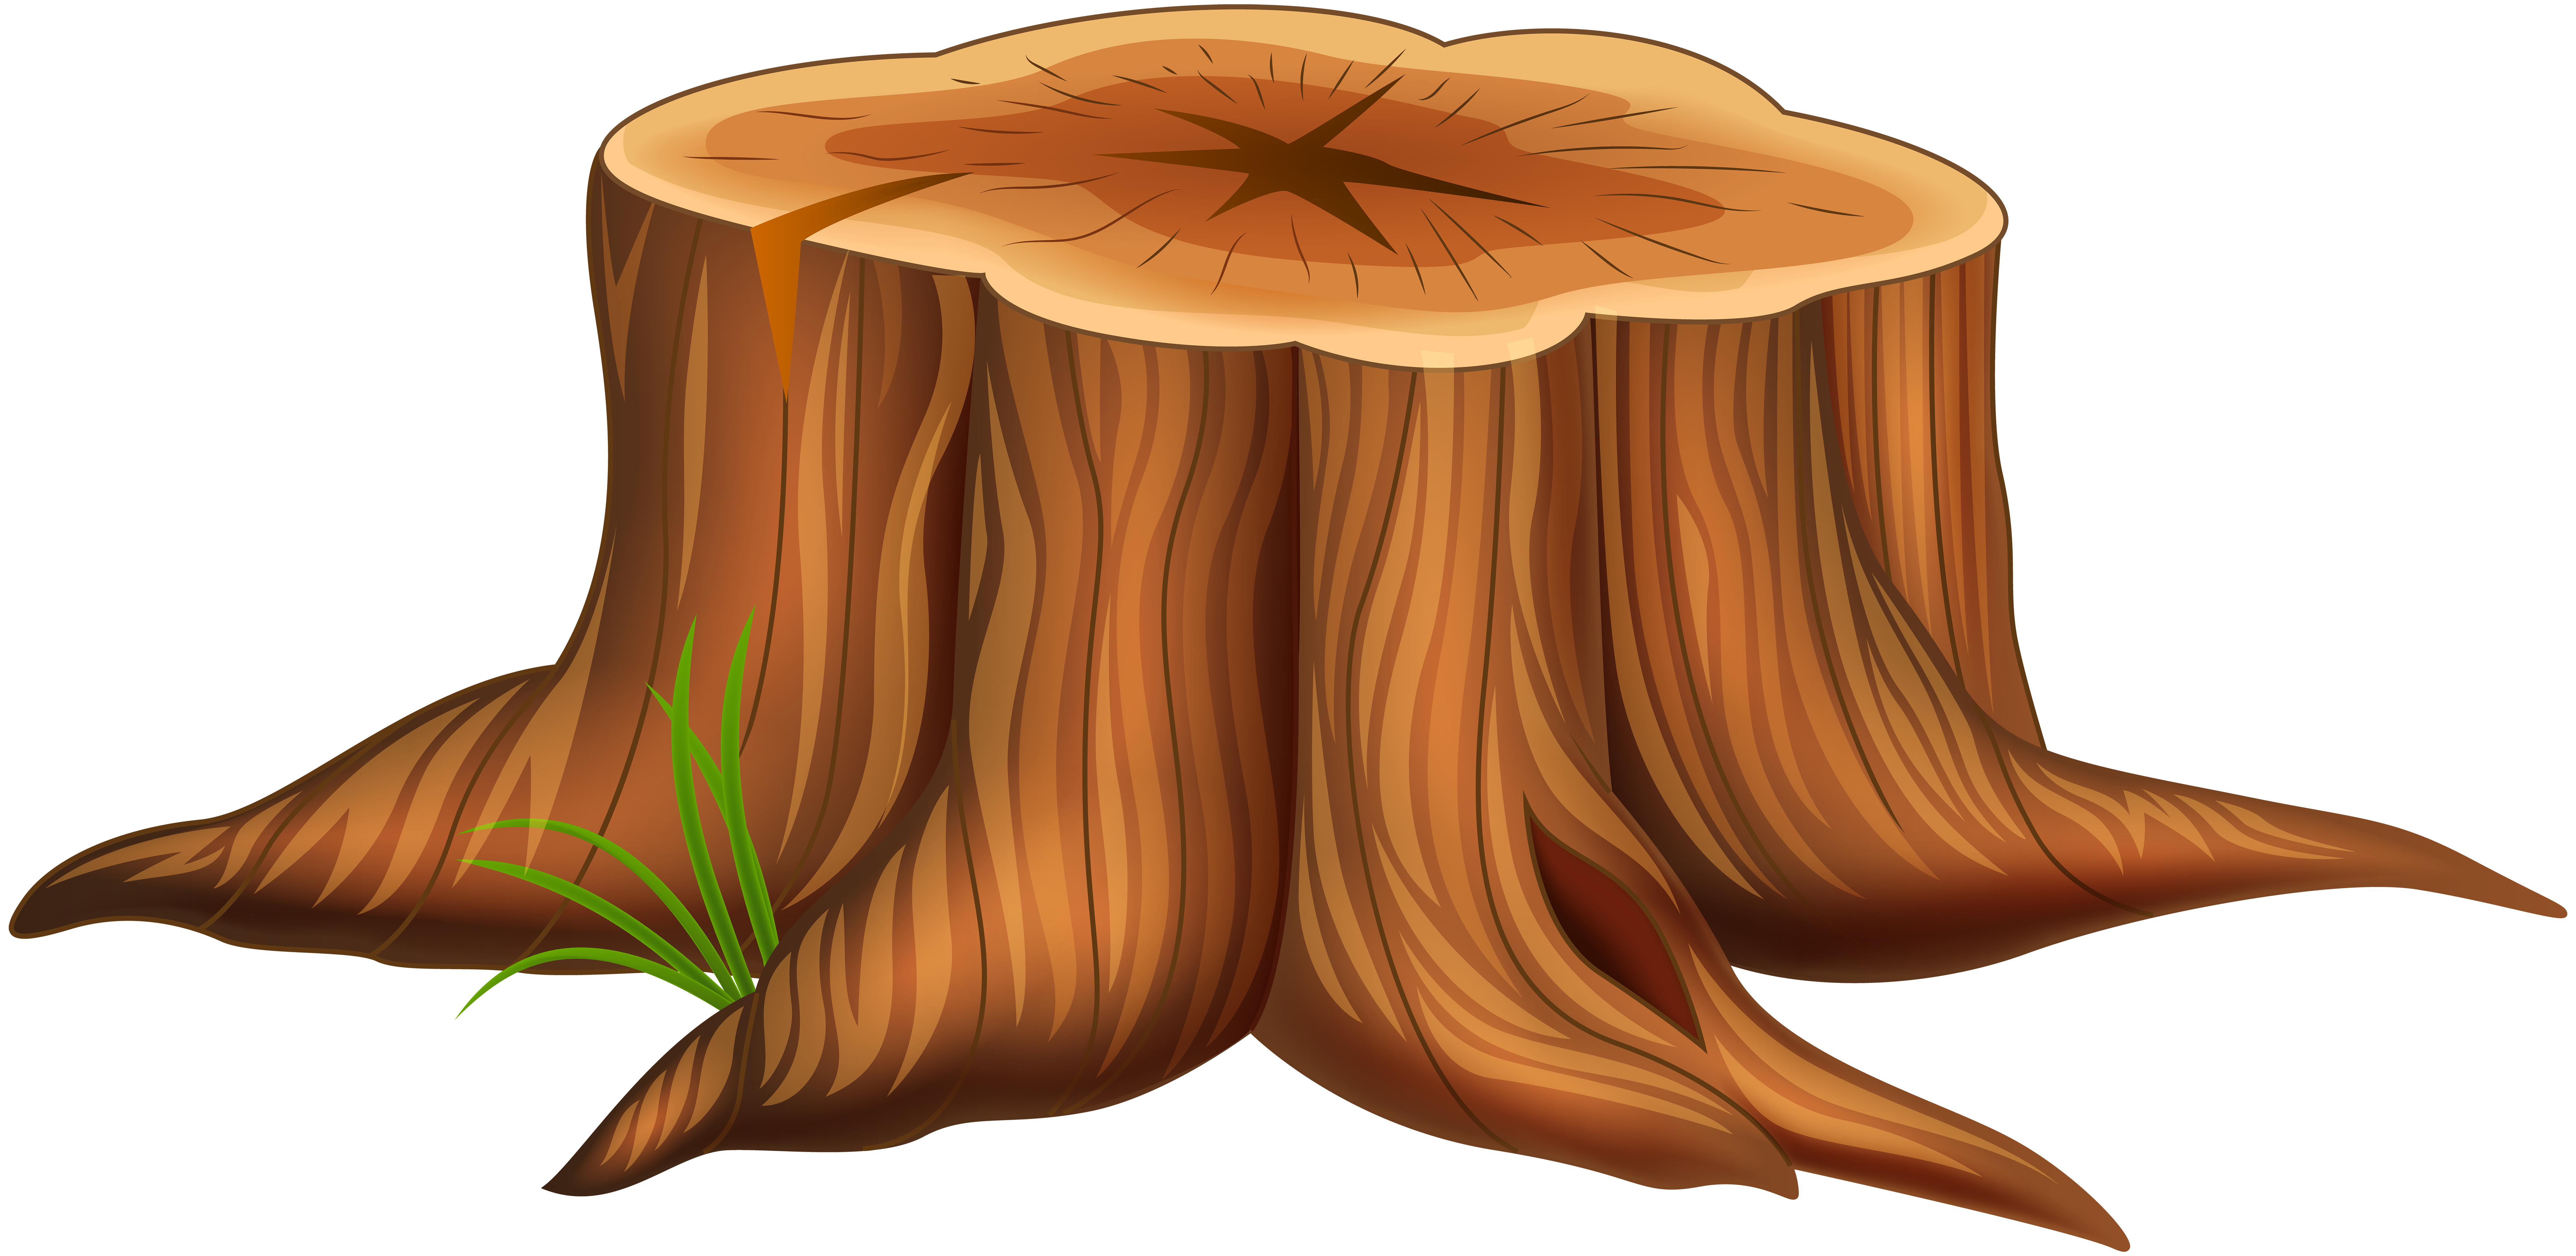 Tree Stump PNG Clip Art Image | Gallery Yopriceville - High-Quality ...